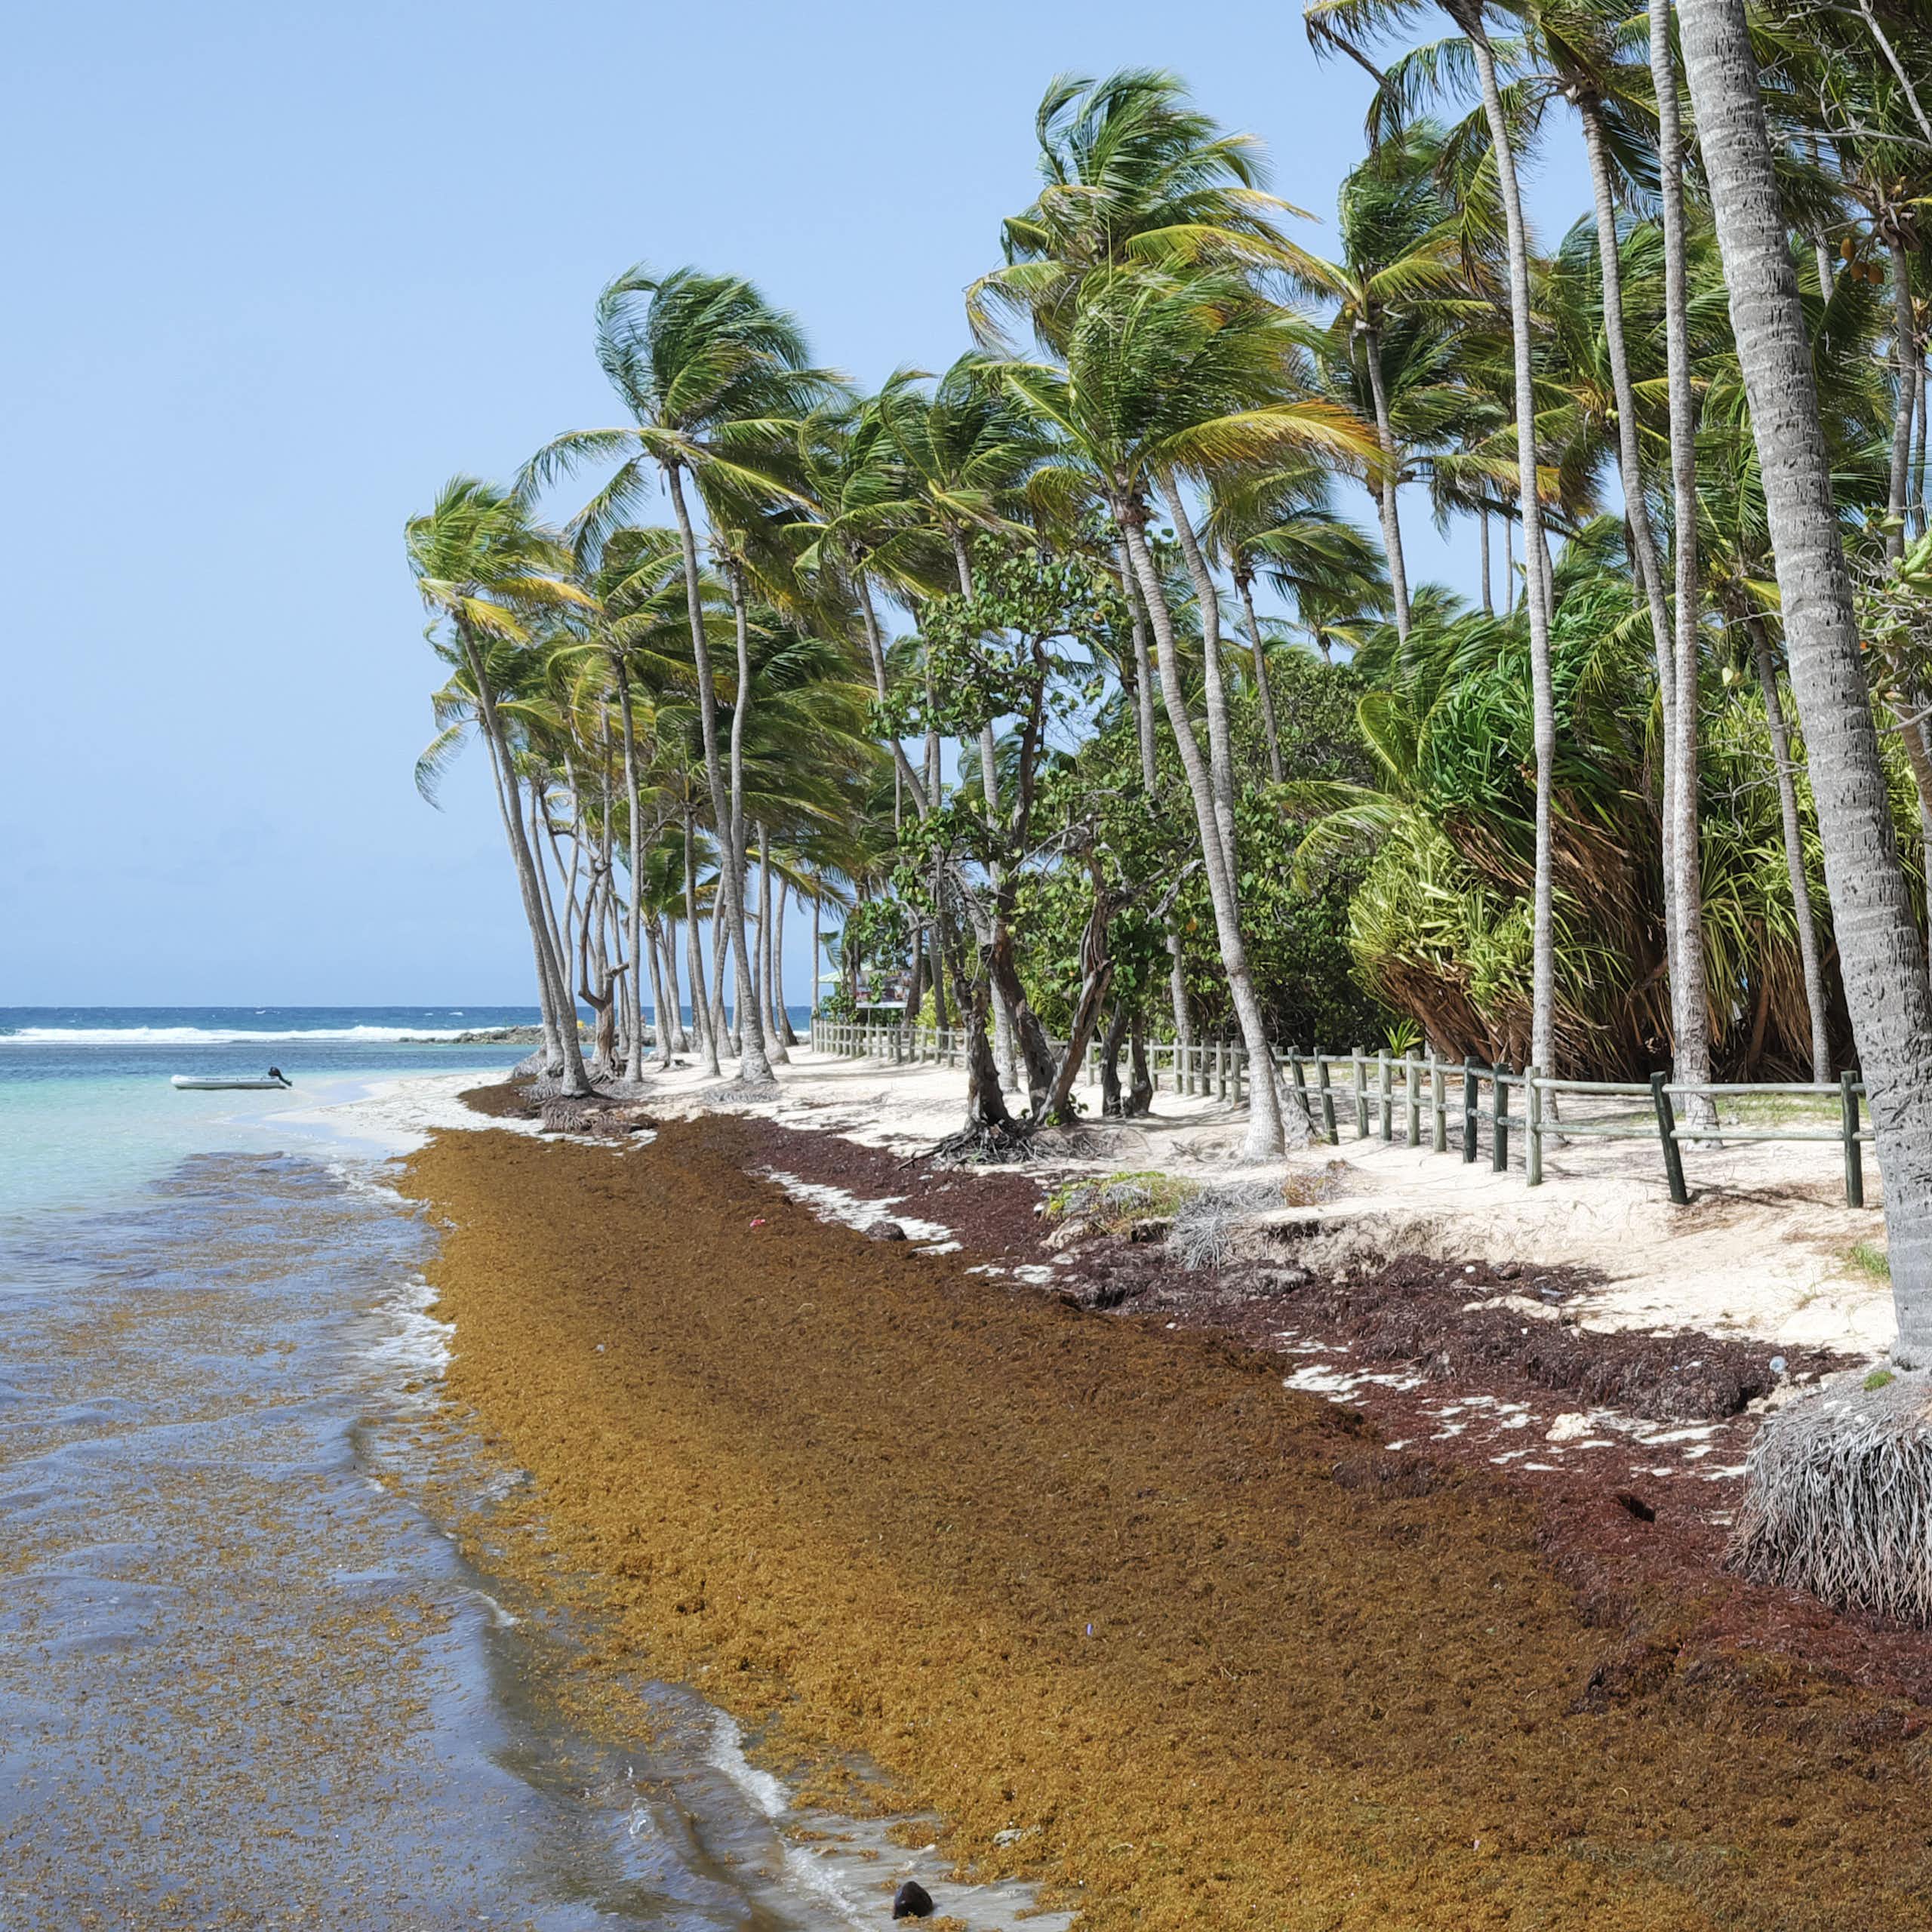 A man walks on a narrow area of white sand, while seaweed covers most of the beach and shore.